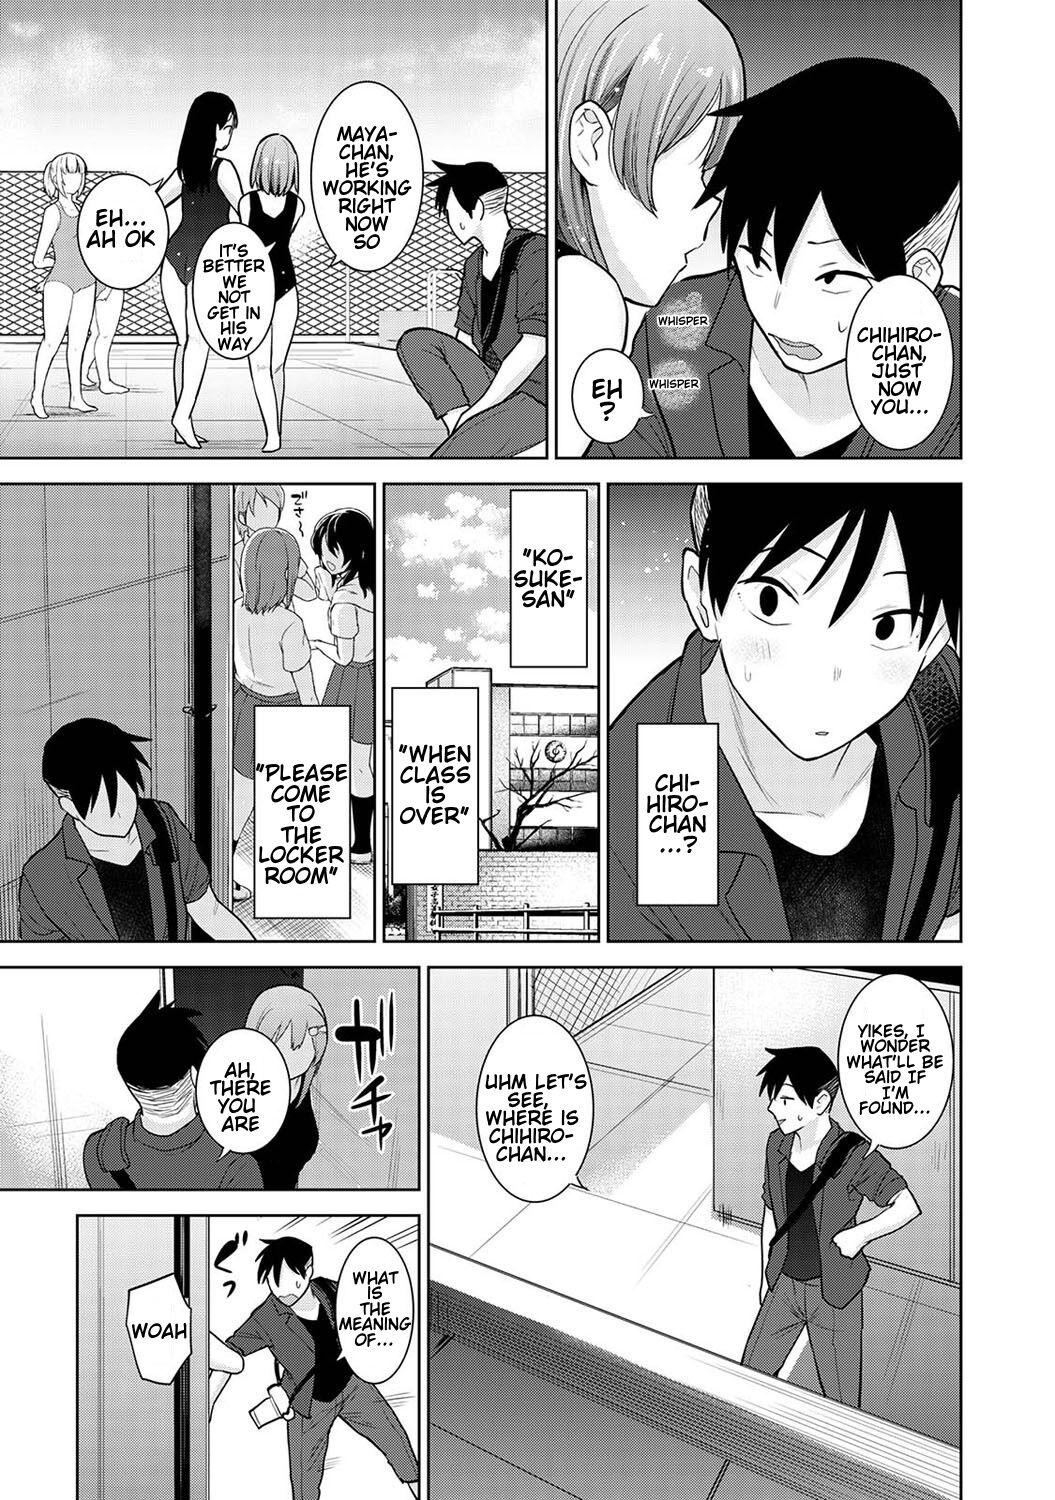 Teensnow SotsuAl Cameraman to Shite Ichinenkan Joshikou no Event e Doukou Suru Koto ni Natta Hanashi | A Story About How I Ended Up Being A Yearbook Cameraman at an All Girls' School For A Year Ch. 5 Peeing - Page 6